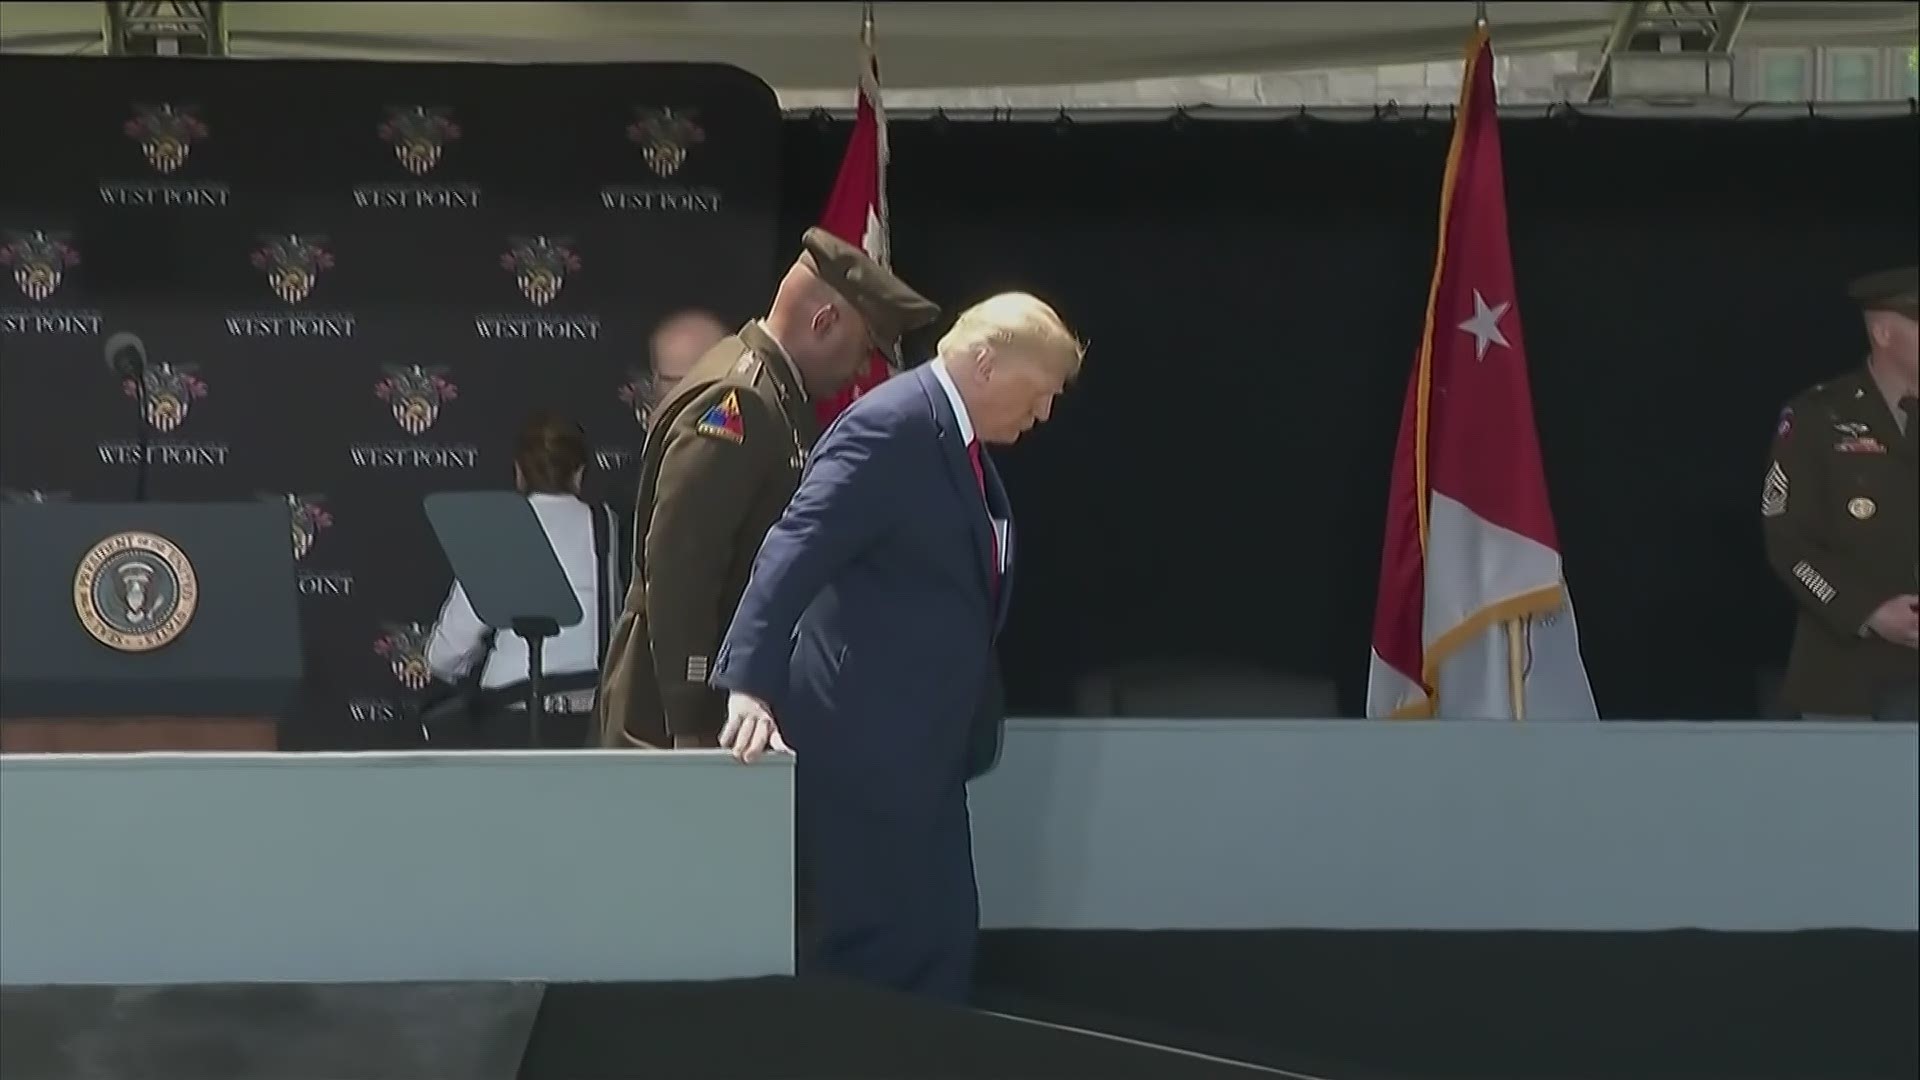 President Trump descends a ramp after giving the commencement address at West Point.